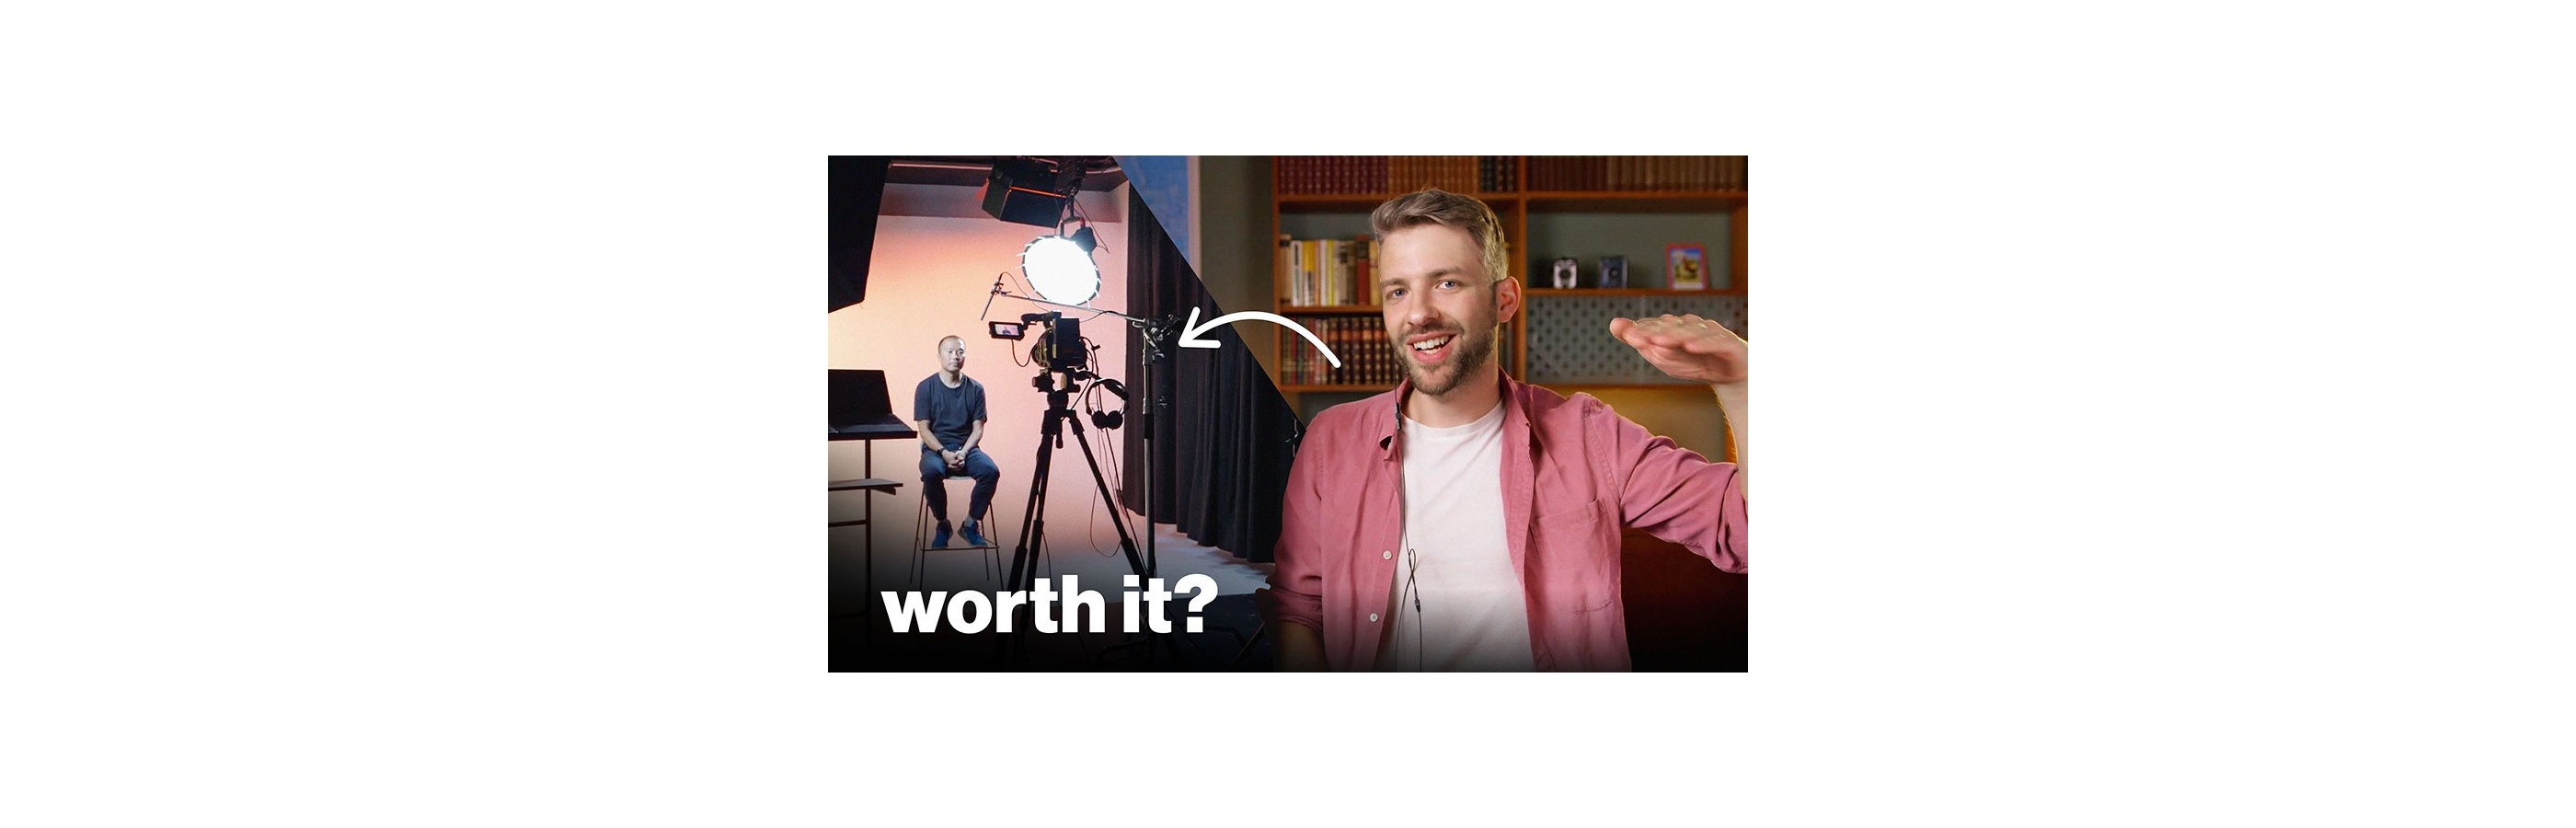 How do you go from solo filmer to full scale production company?